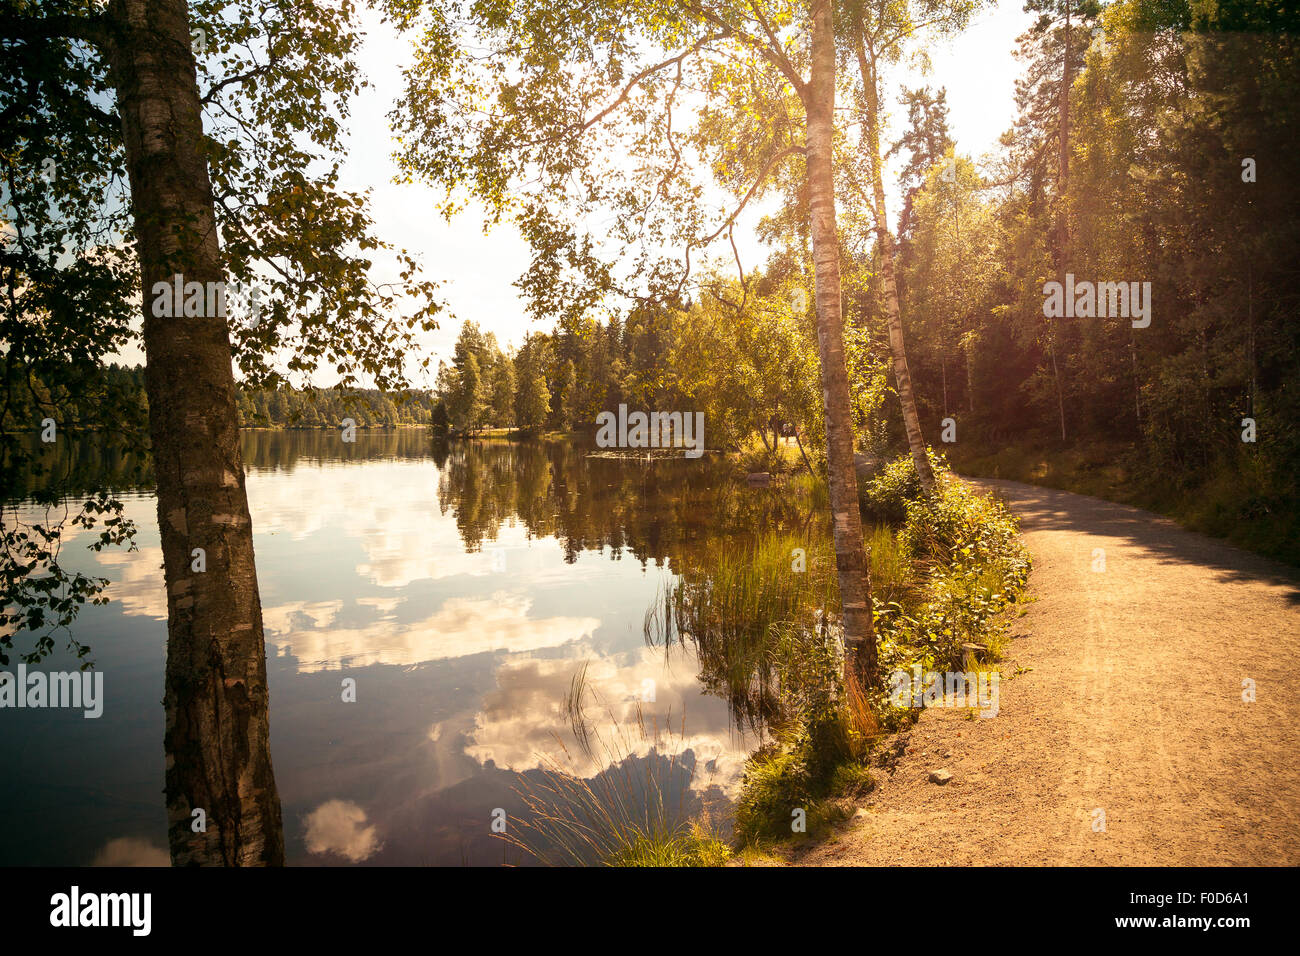 Warm temperature landscape, gravel road next to perfectly still lake. Reflections of clouds in the water. Stock Photo